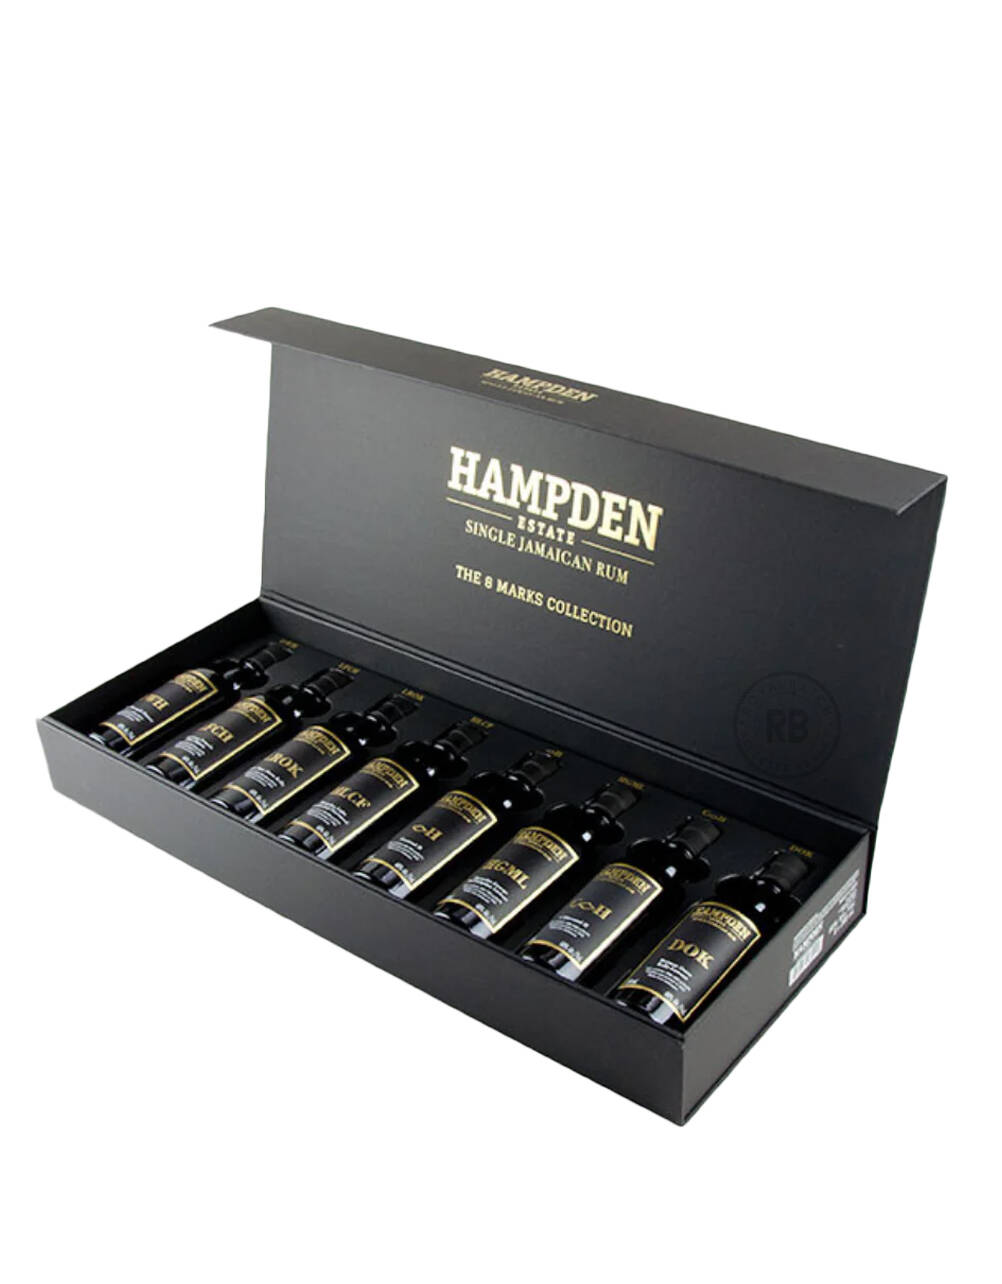 Hampden Estate The 8 Marks Collection Single Jamaican Rum (8 Pack) x 200ml